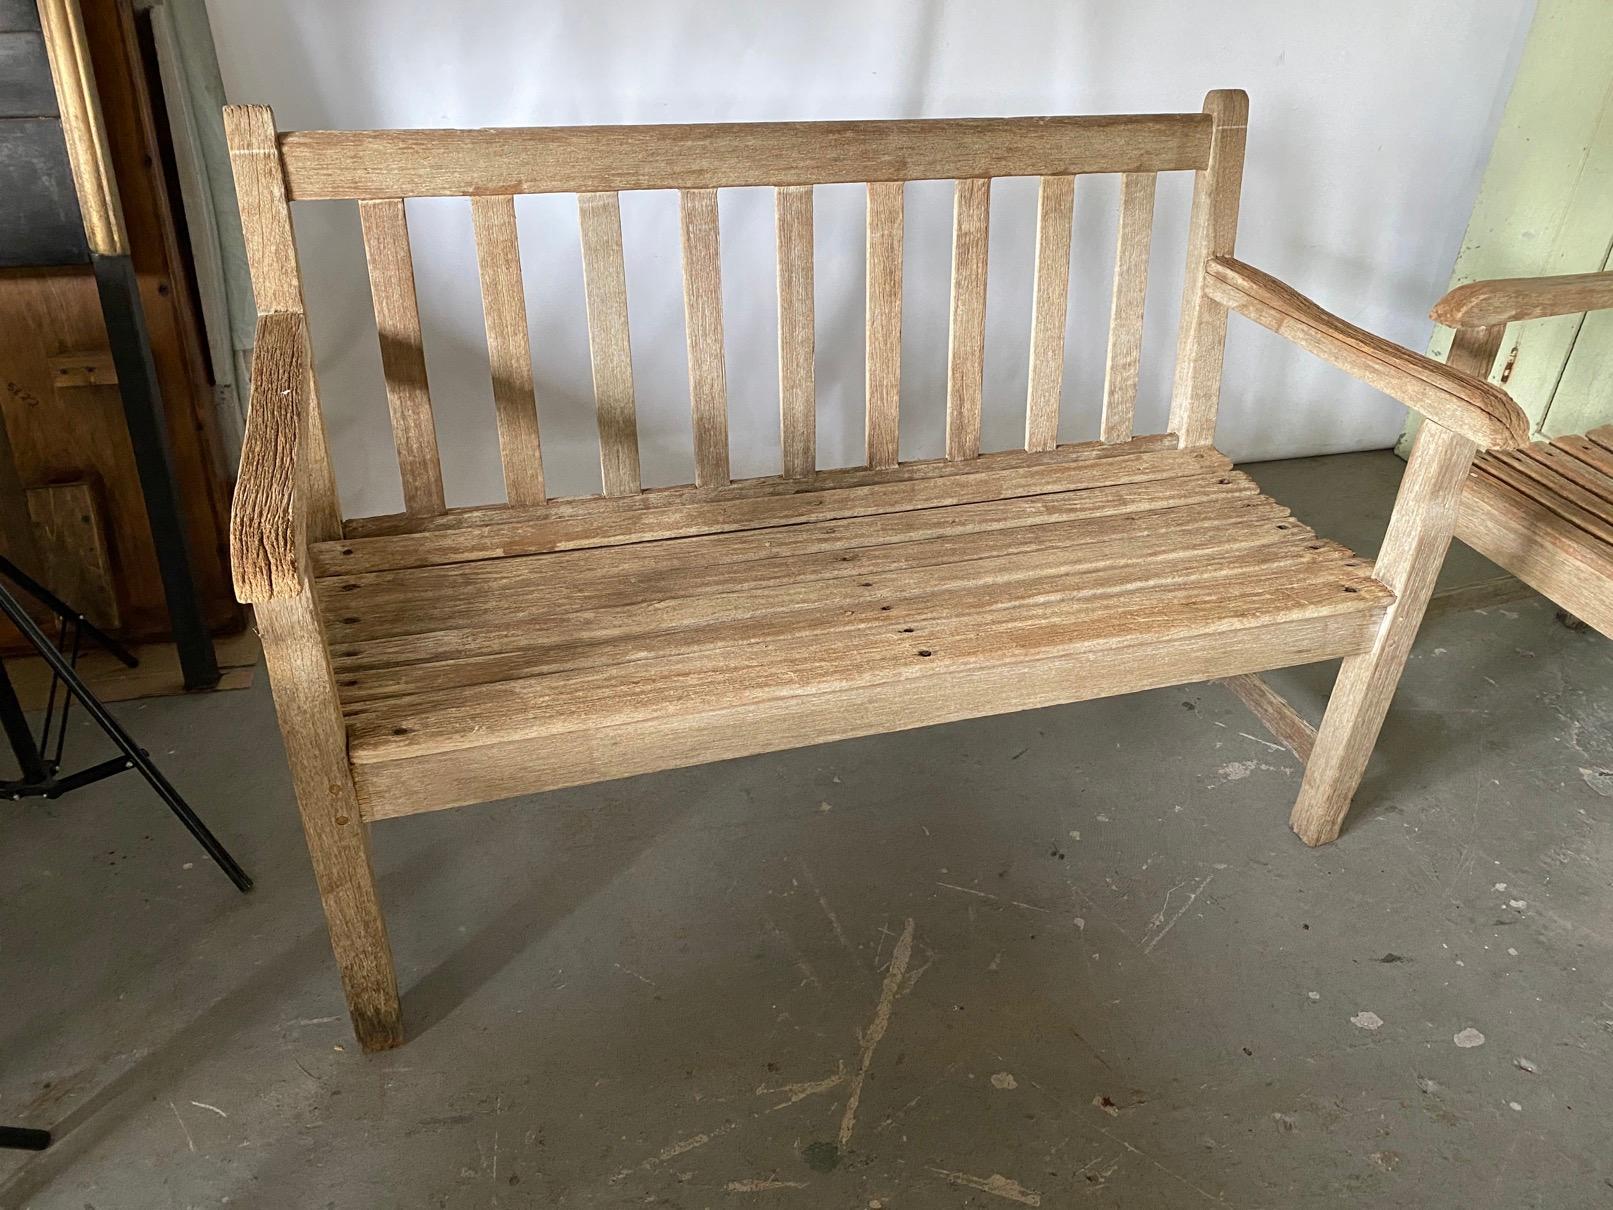 Classic styling, vintage two-seat teak bench with arms has wonderful weathered patina. A second matching bench is available. Wonderful for the patio, porch or garden.